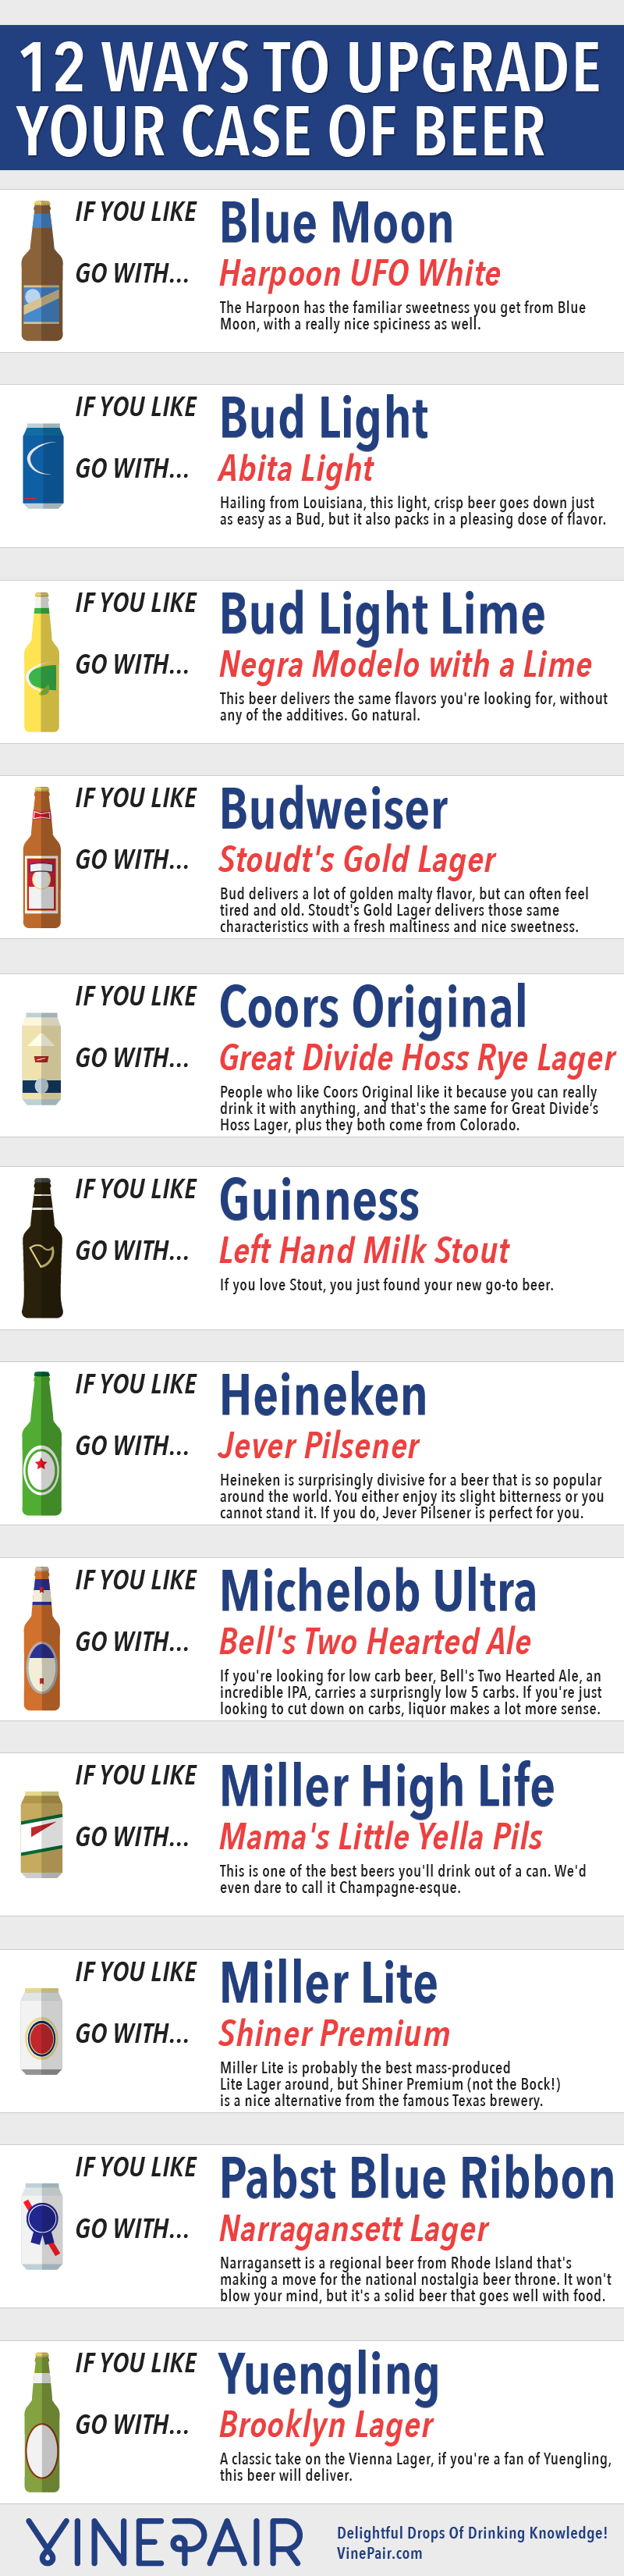 Upgrade 12 Popular Beers With These Alternate Suggestions - Infographic